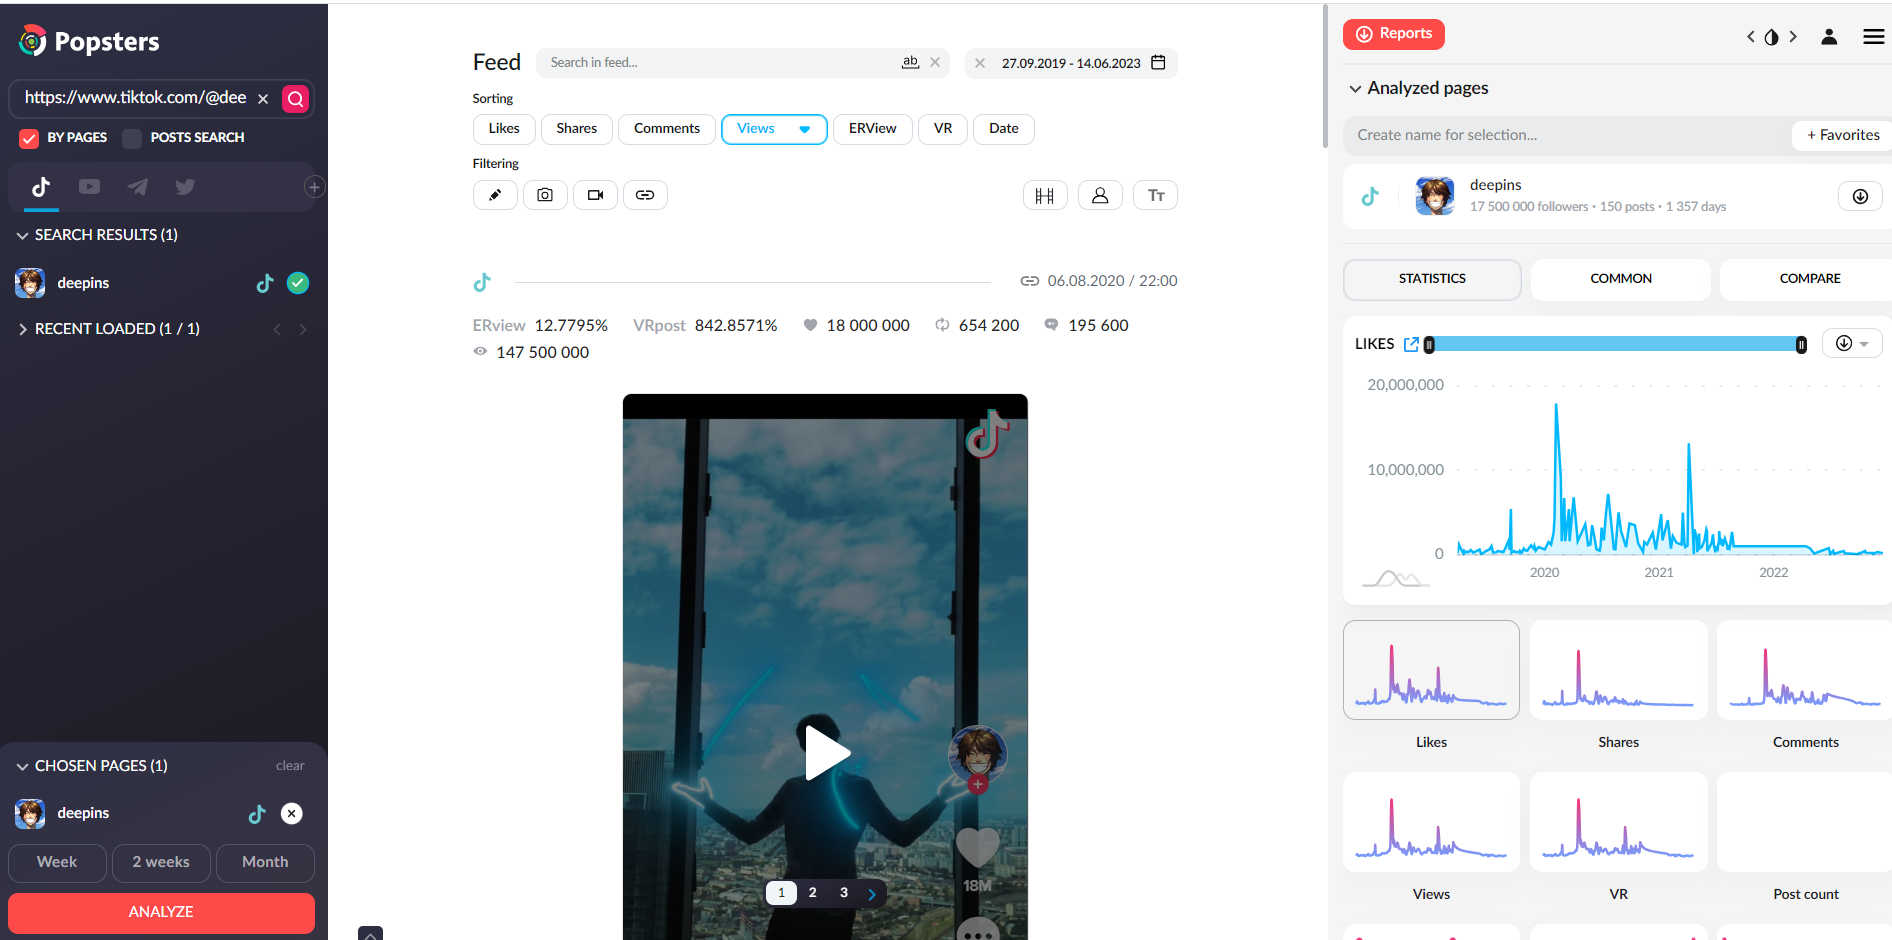 A way to expand the possibilities for analyzing any pages on TikTok